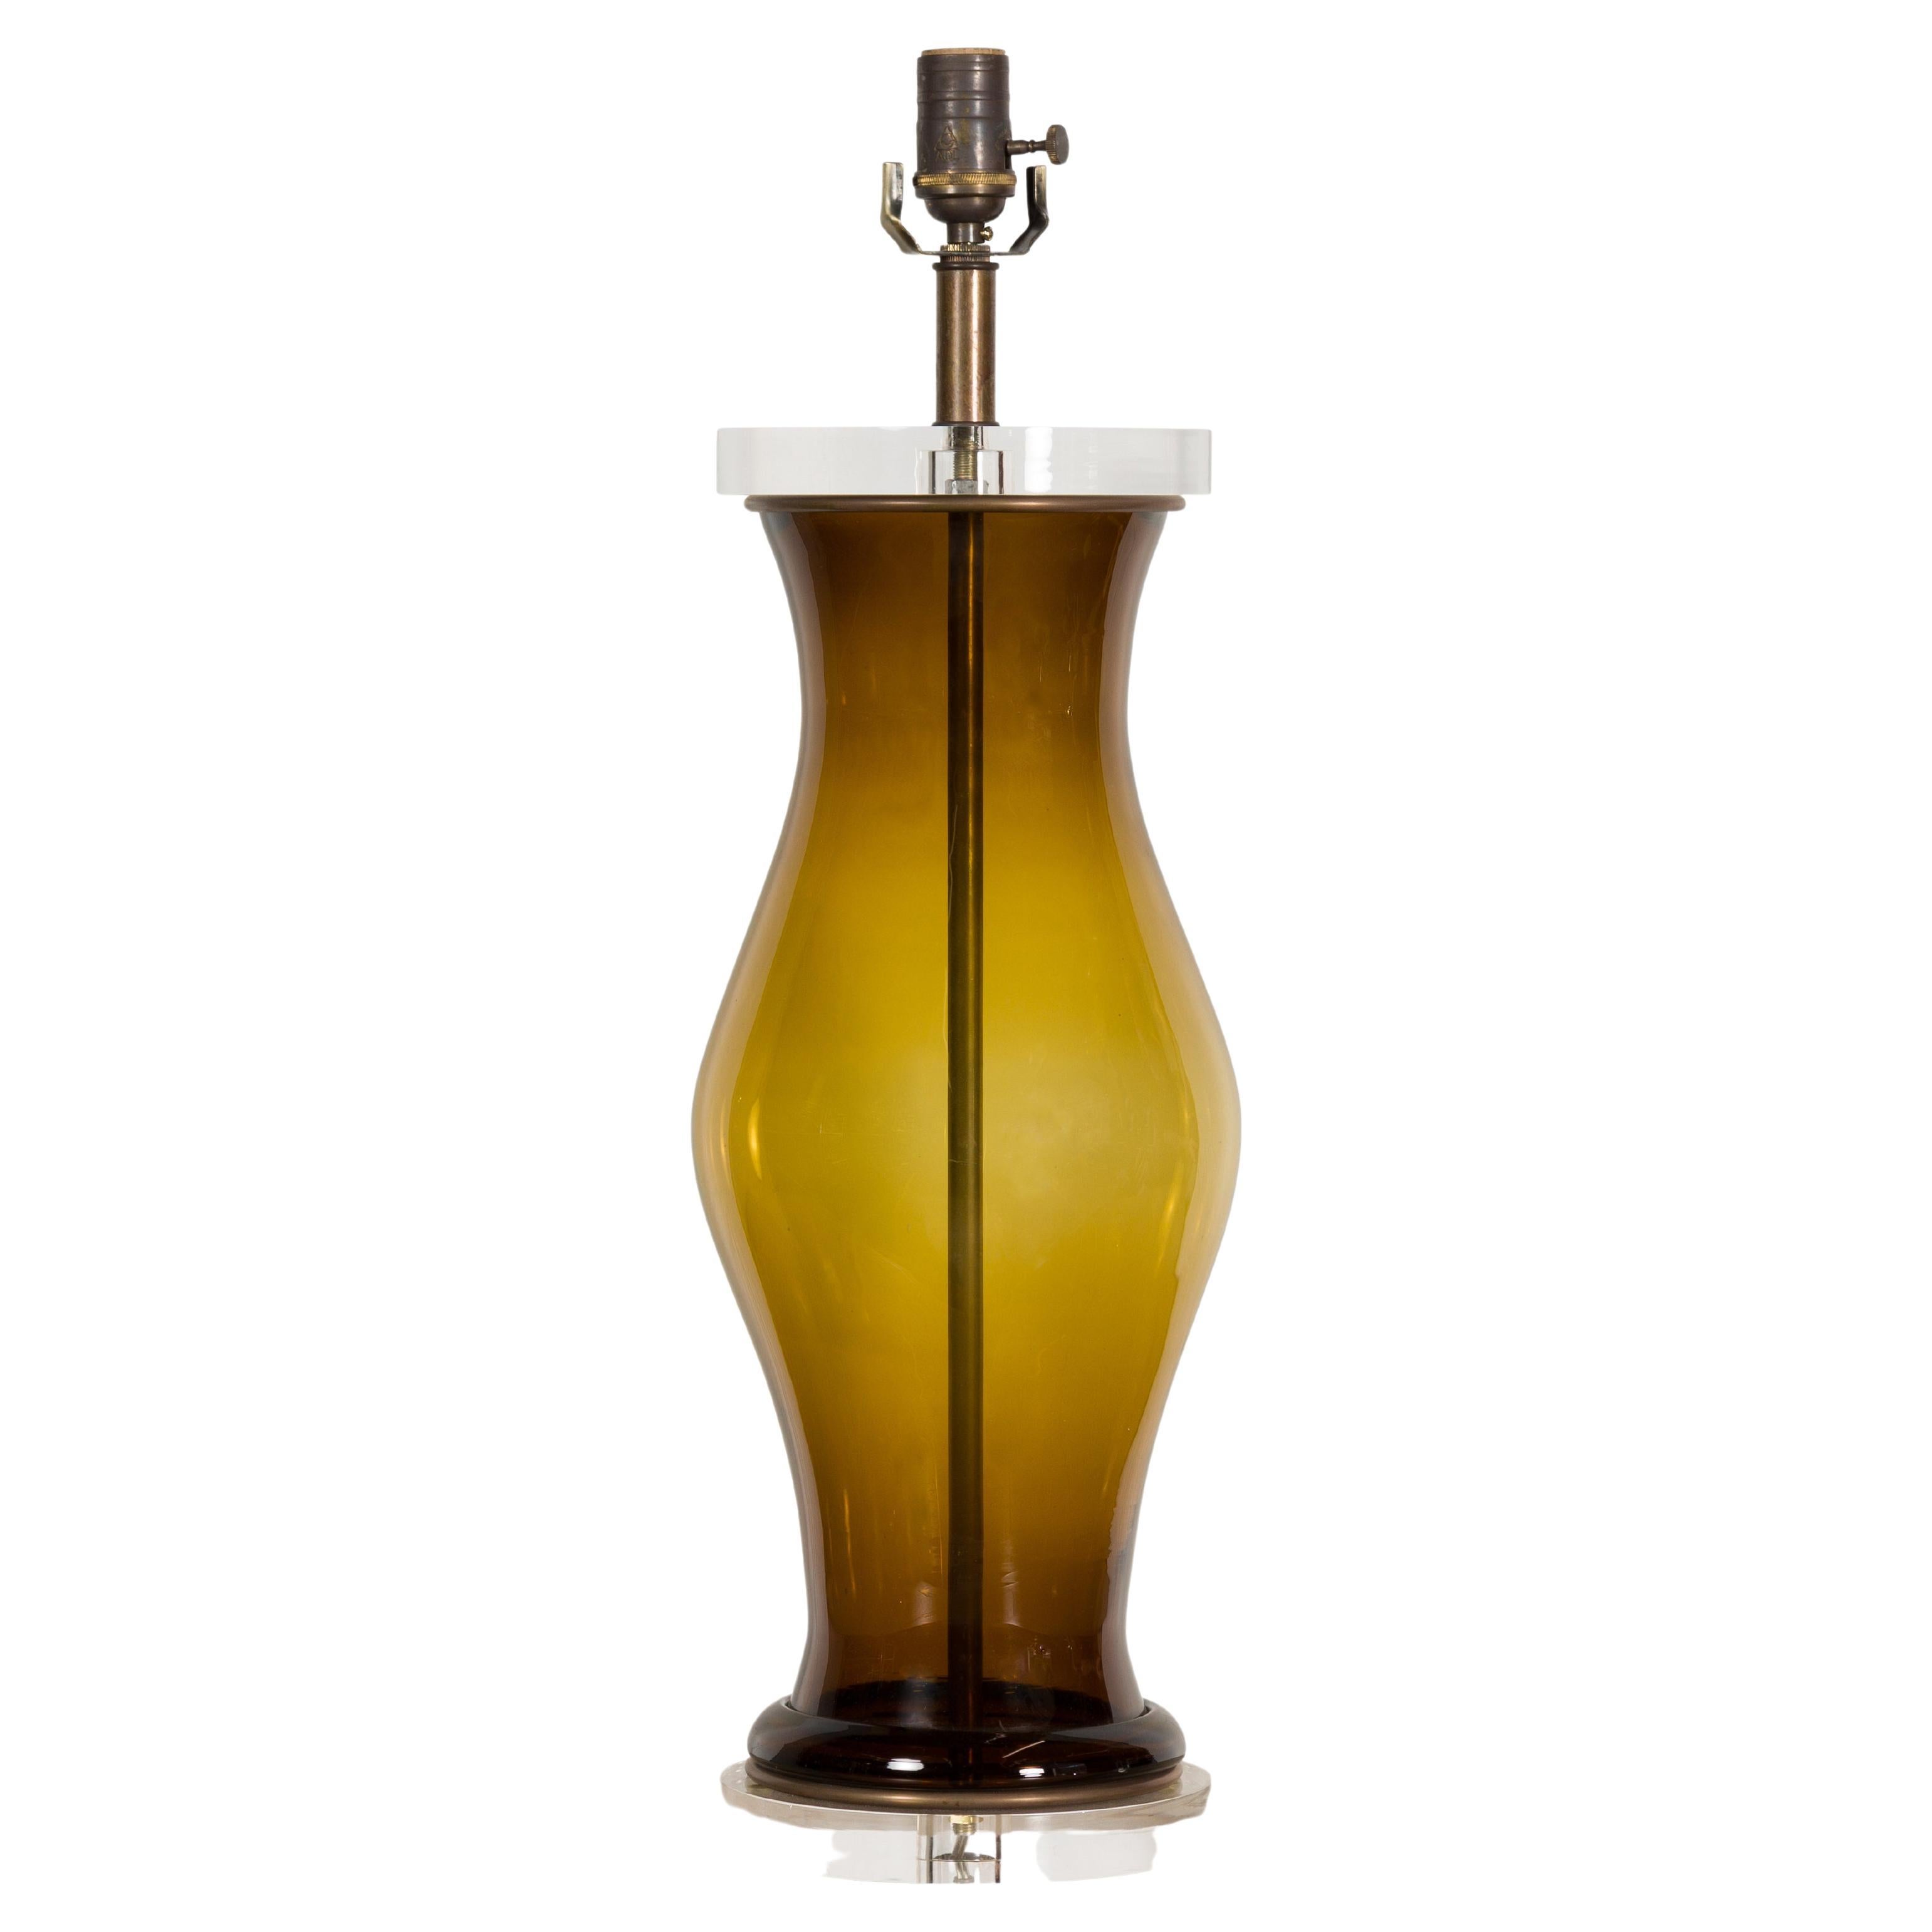 A Midcentury English dark amber glass table lamp with custom lucite base, rewired for the USA. Immerse yourself in the warm glow of sophistication with this Midcentury English dark amber glass table lamp. A radiant beacon of vintage charm and modern